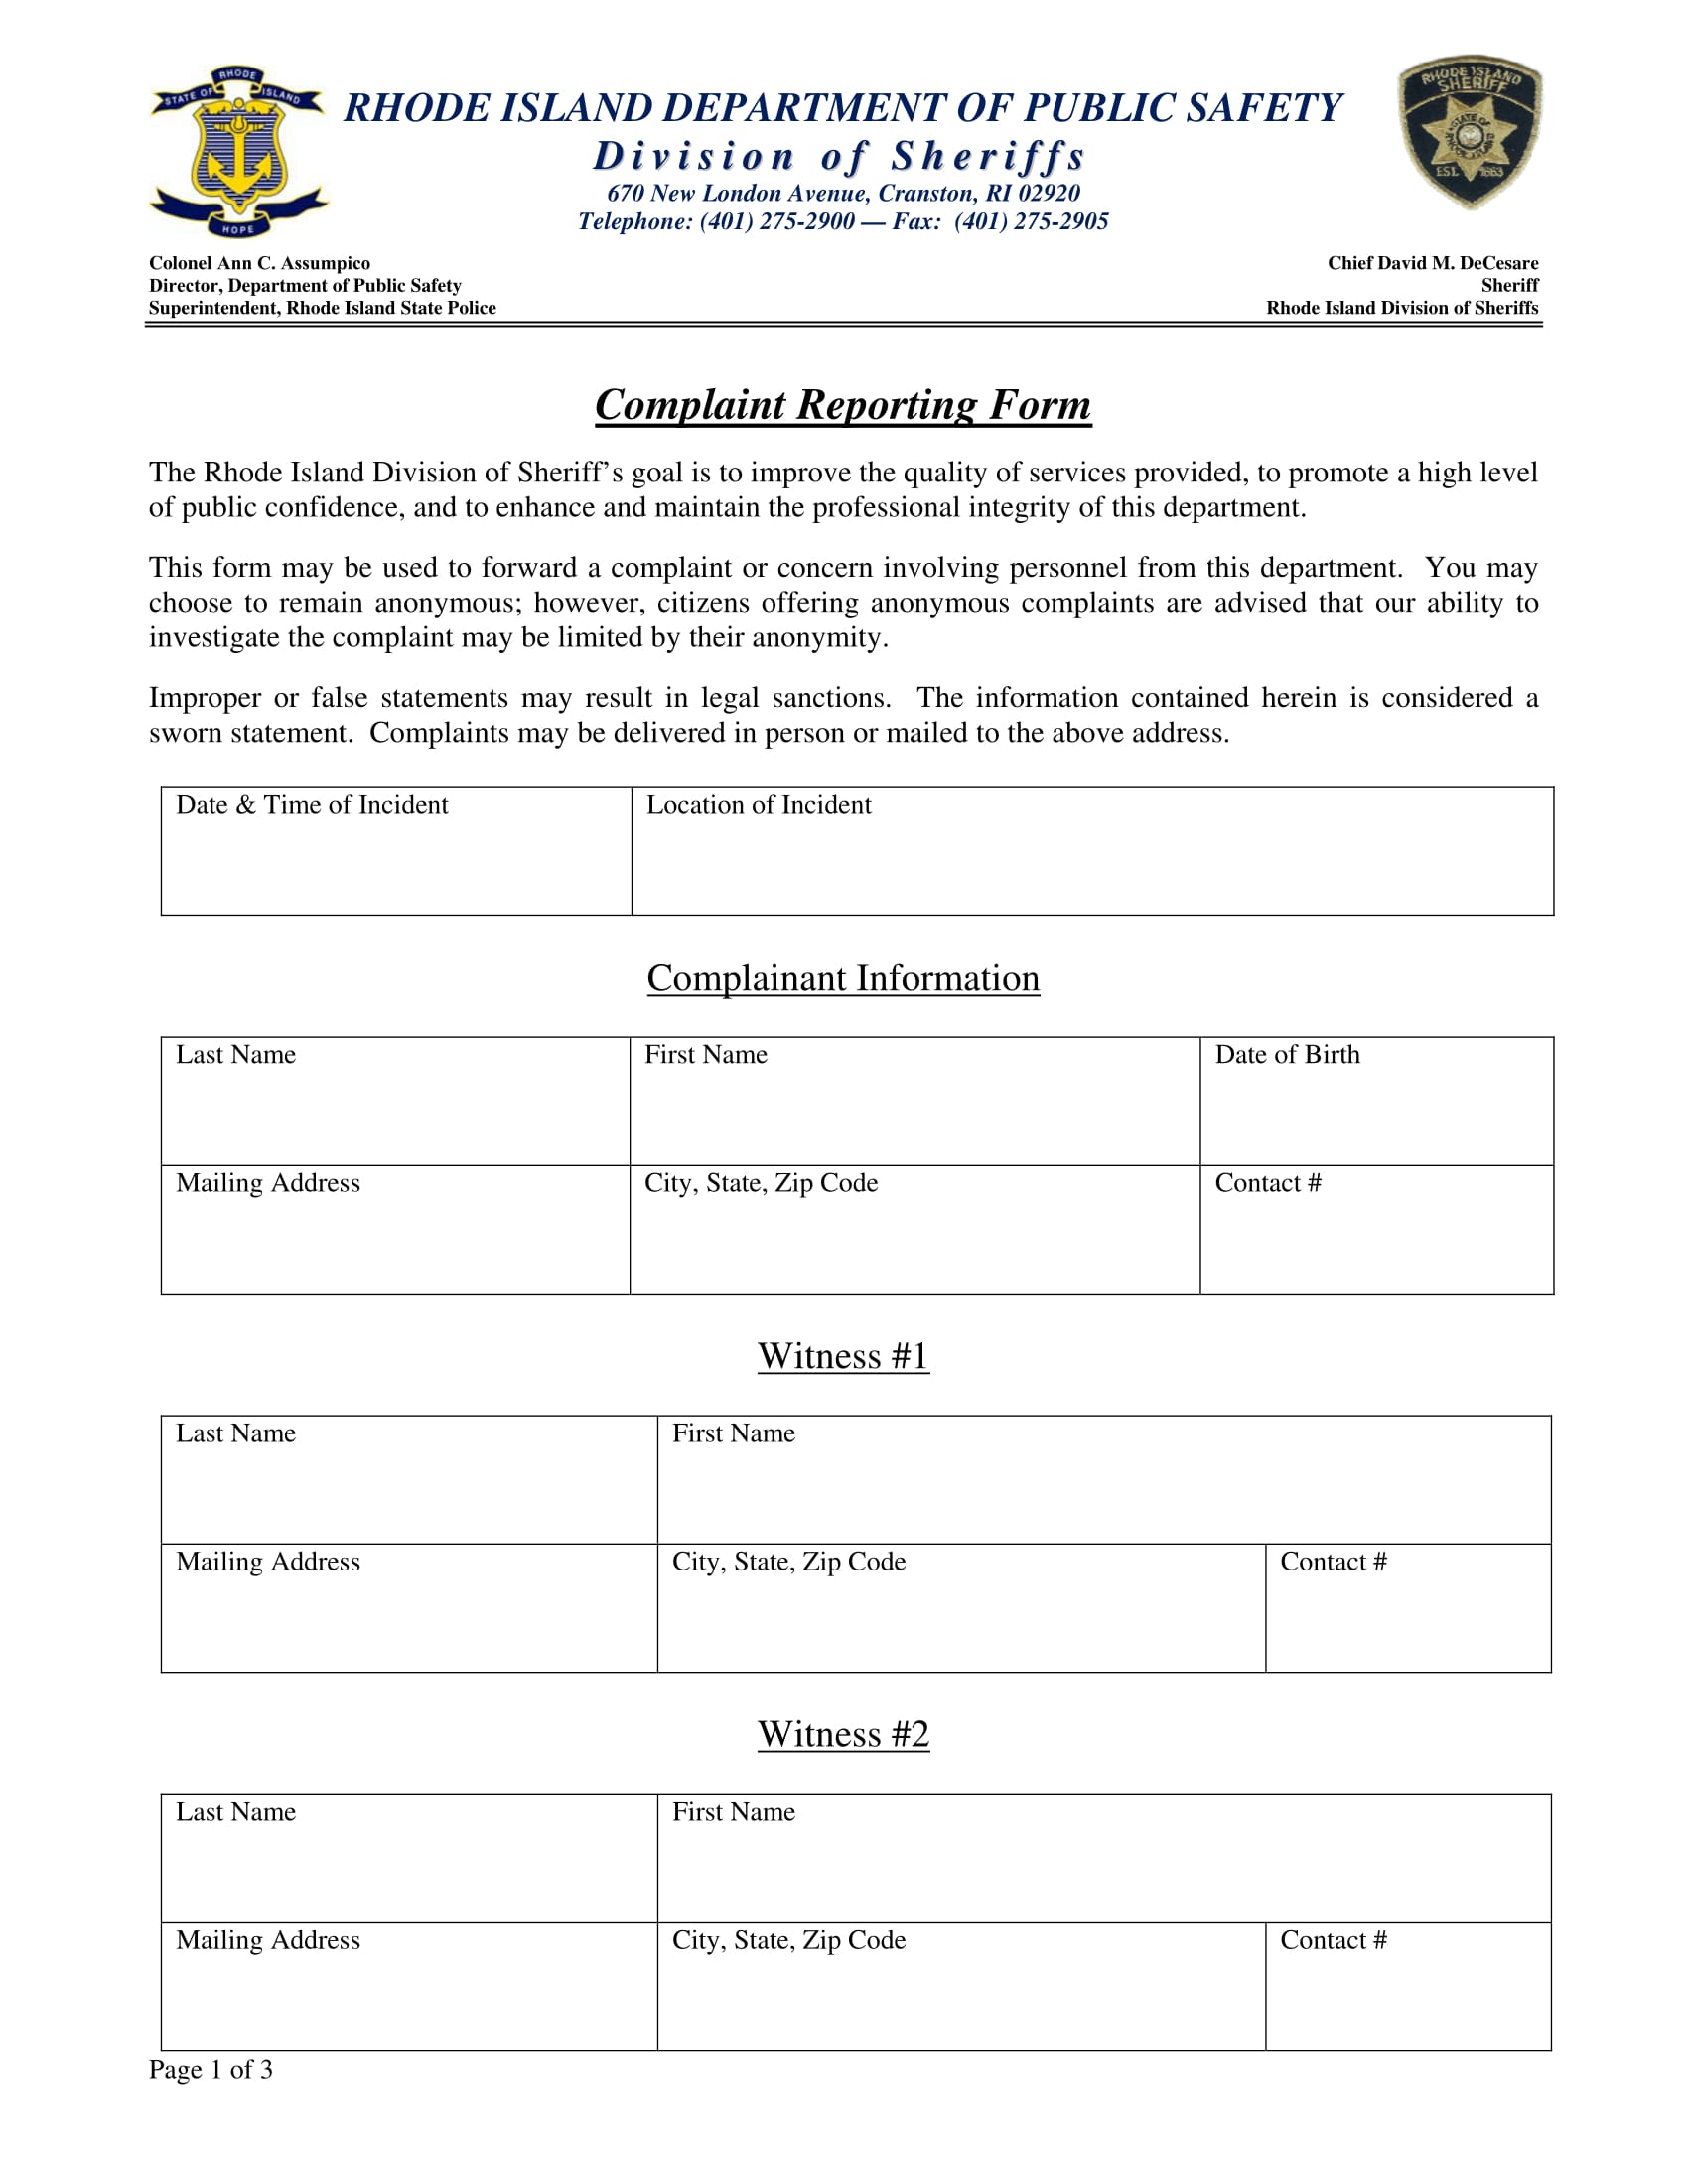 complaint reporting form 1